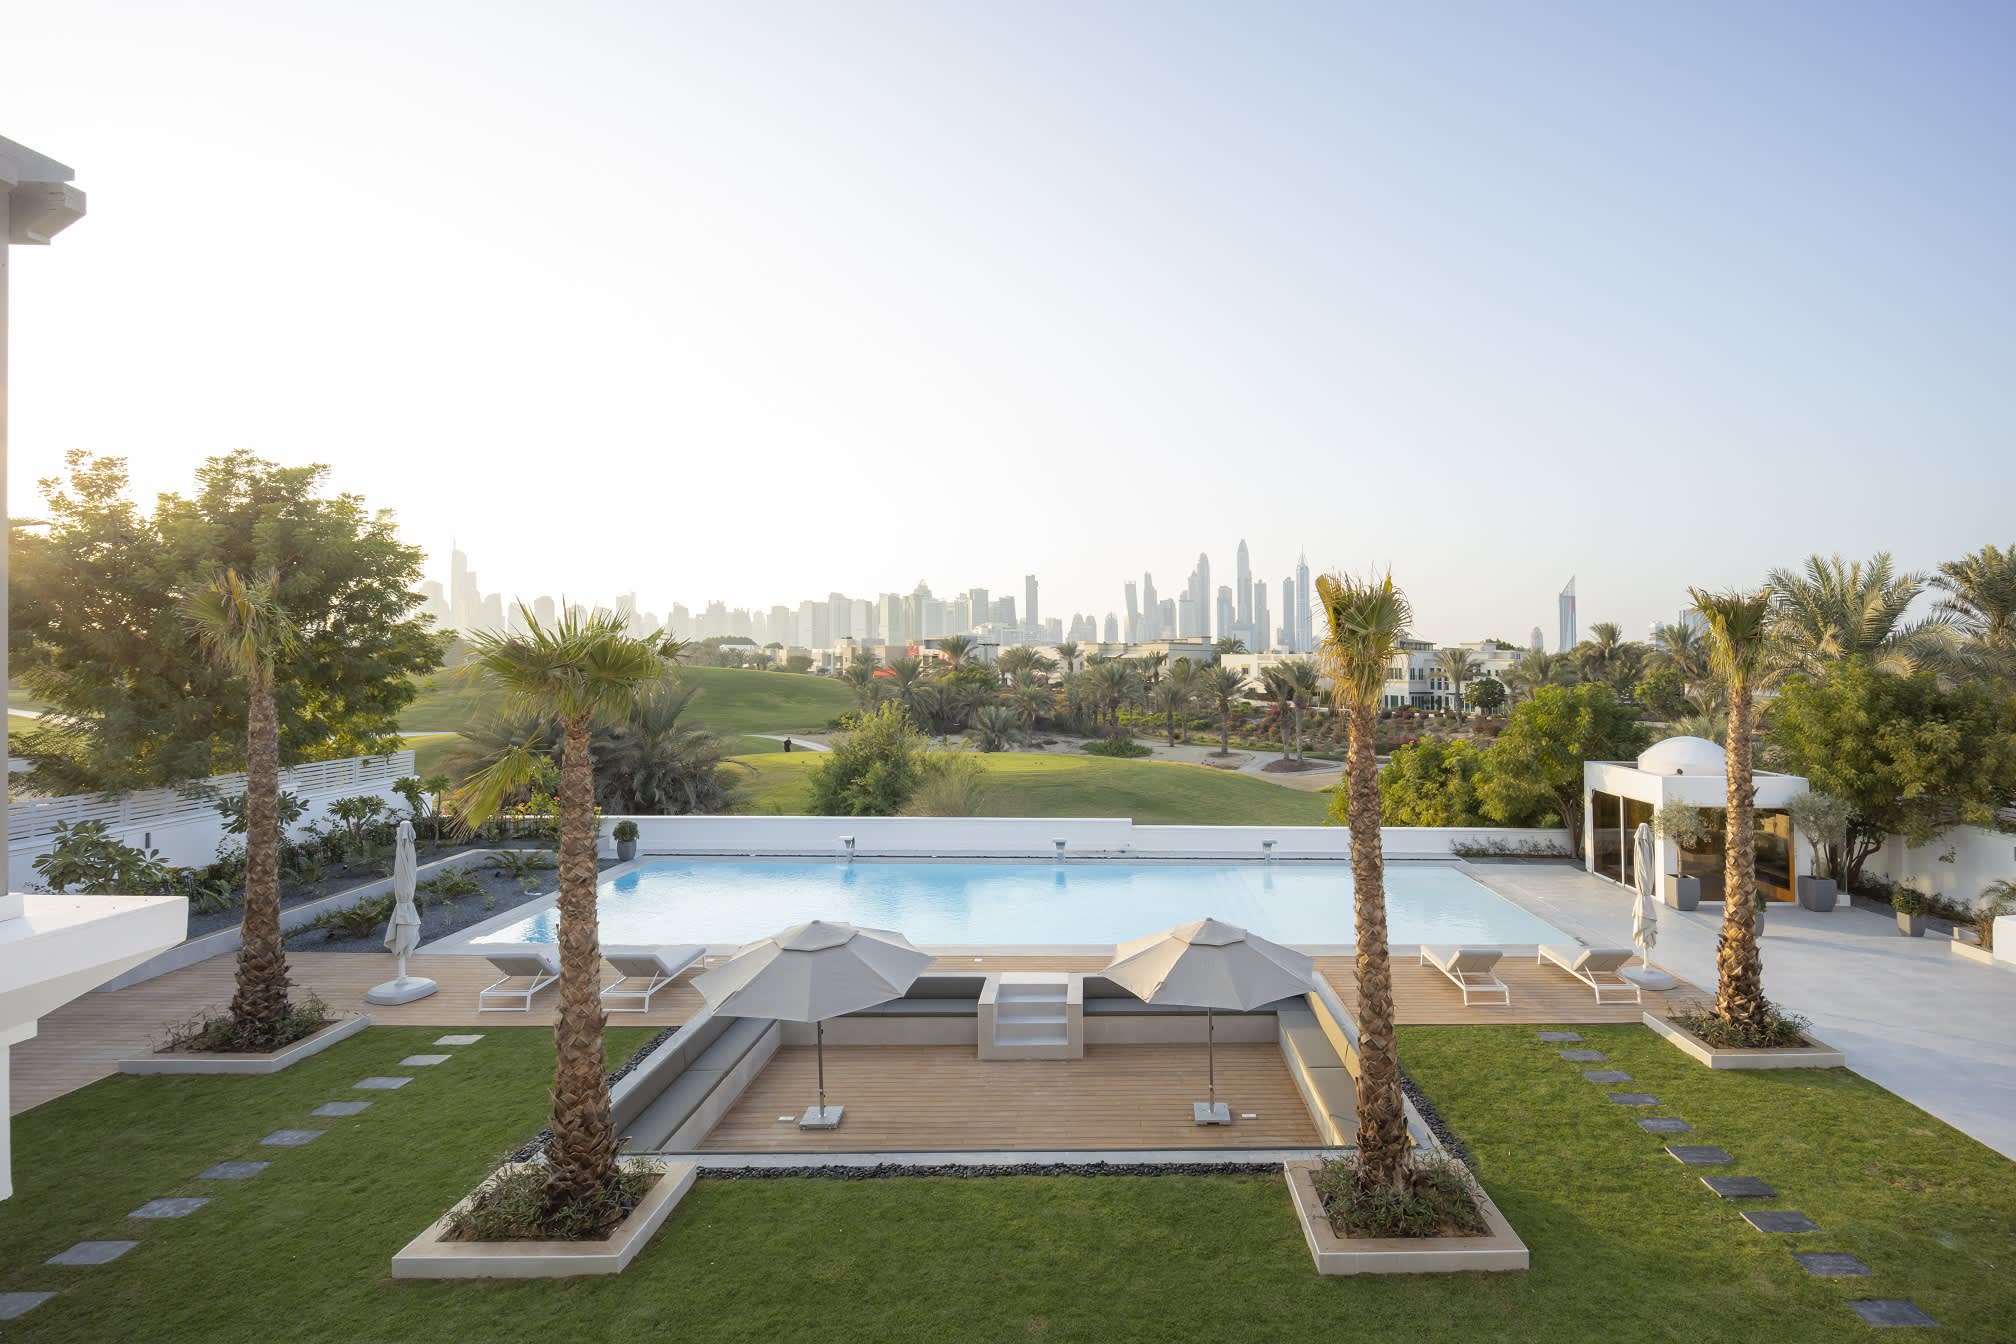 Swanky Vacation Rentals Across the Middle East Look to Capitalize on ‘Revenge Tourism' Trend